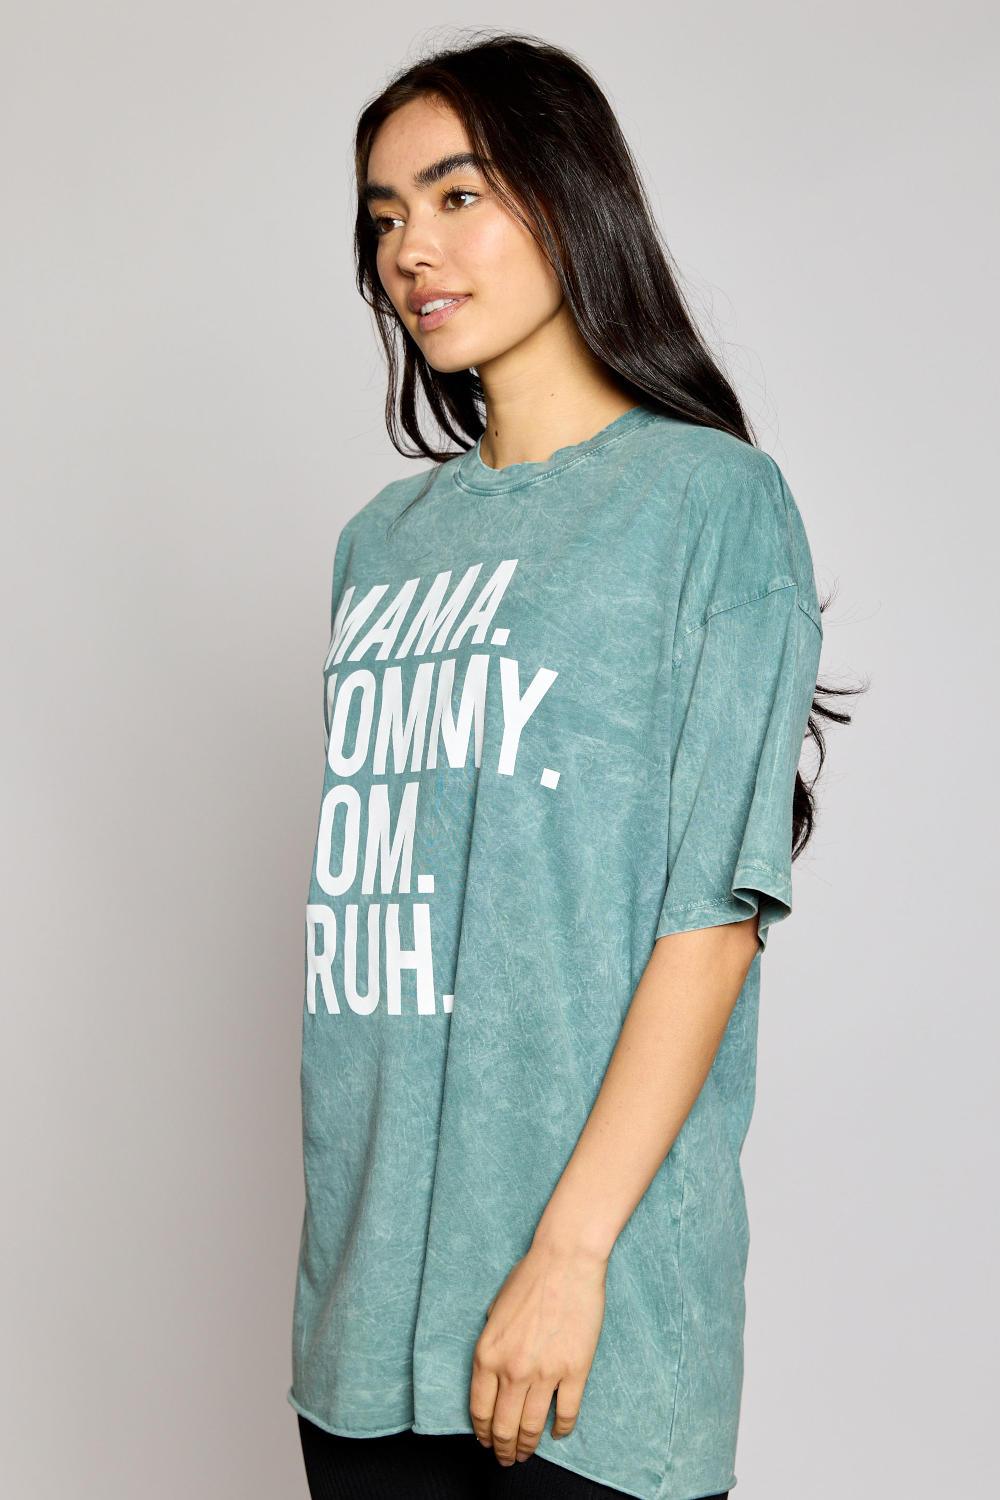 Mama Mommy Mom Bruh Graphic Tee - Strawberry Moon Boutique